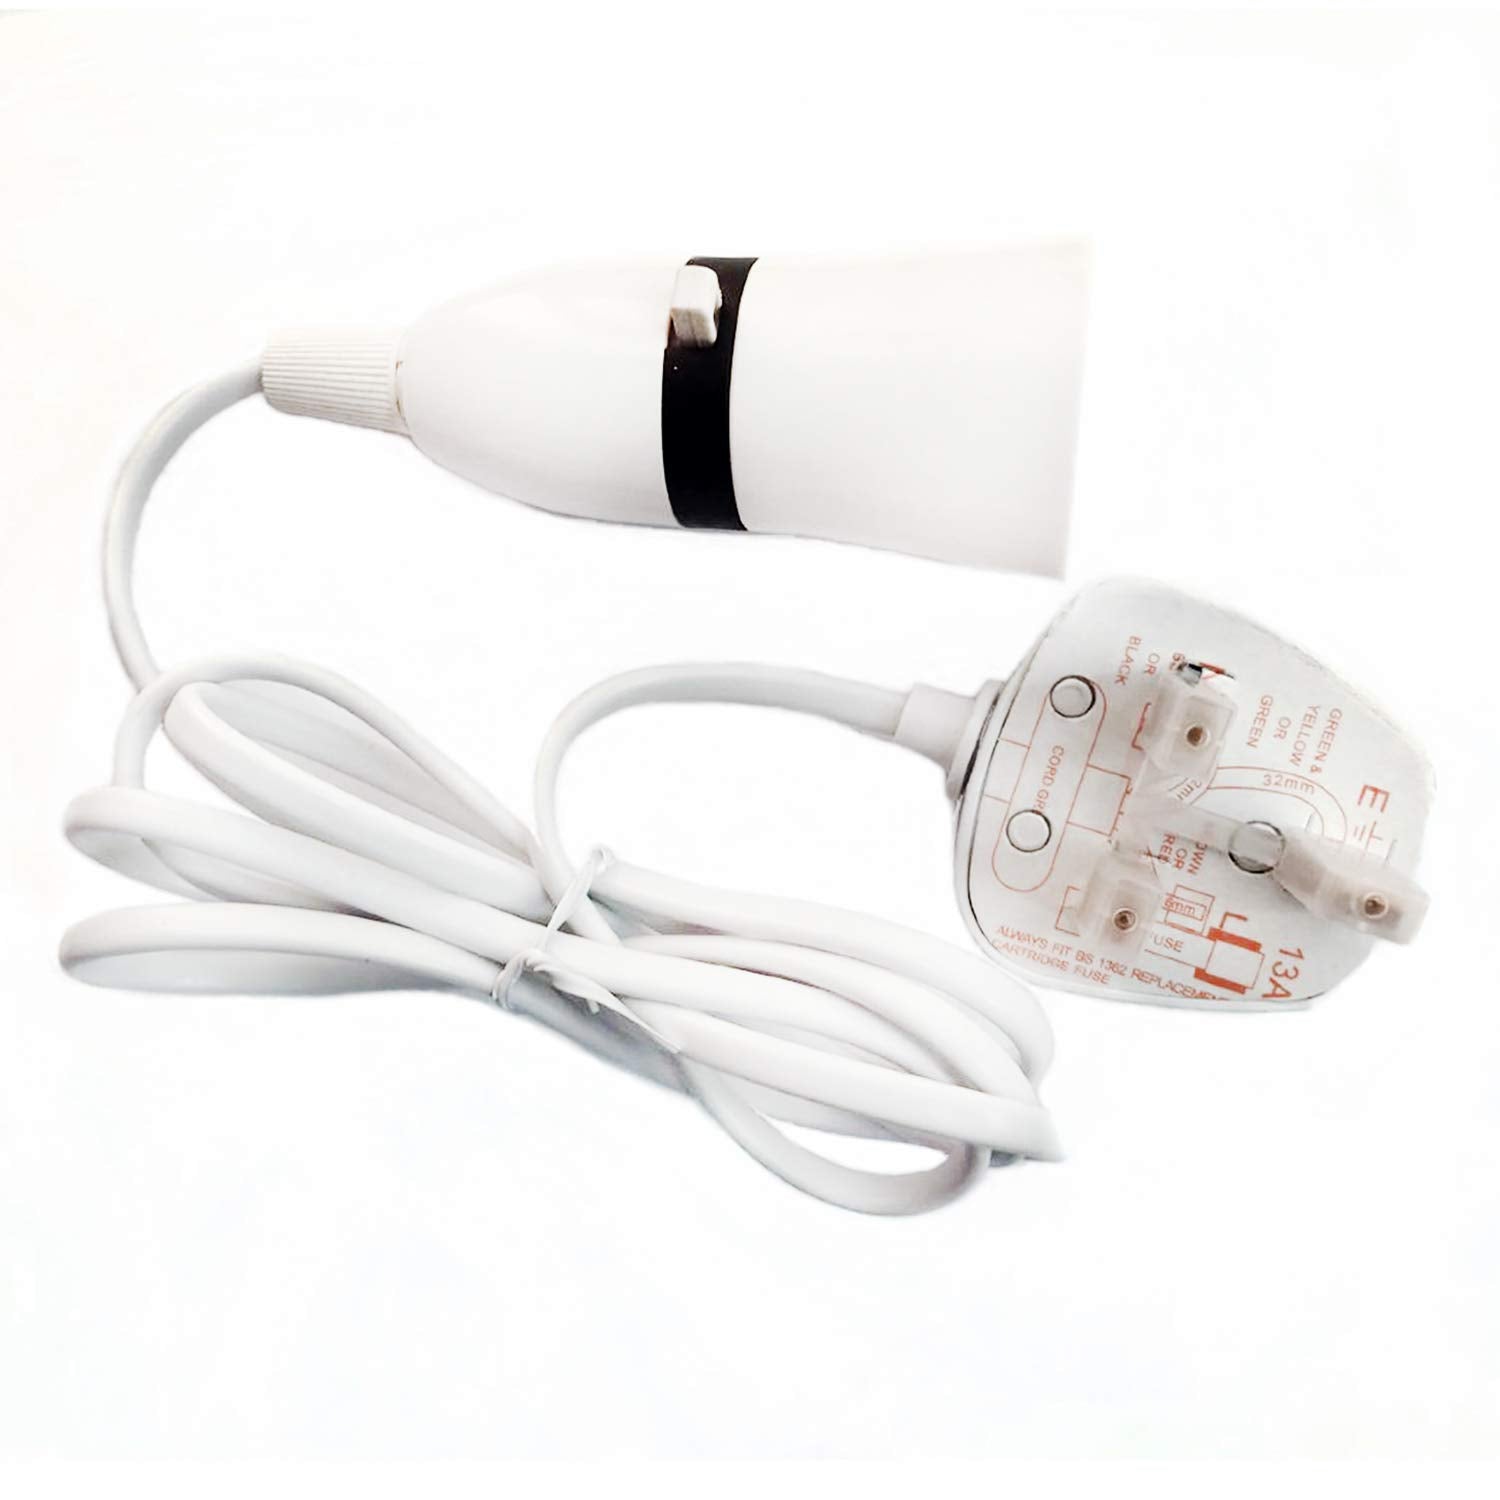 B22 Bayonet Lamp Holder with Cord Switch,Phenolic BS UK Power Cord with 3 pin Fused Plug and 1.5m Wire (White, B22 Socket)